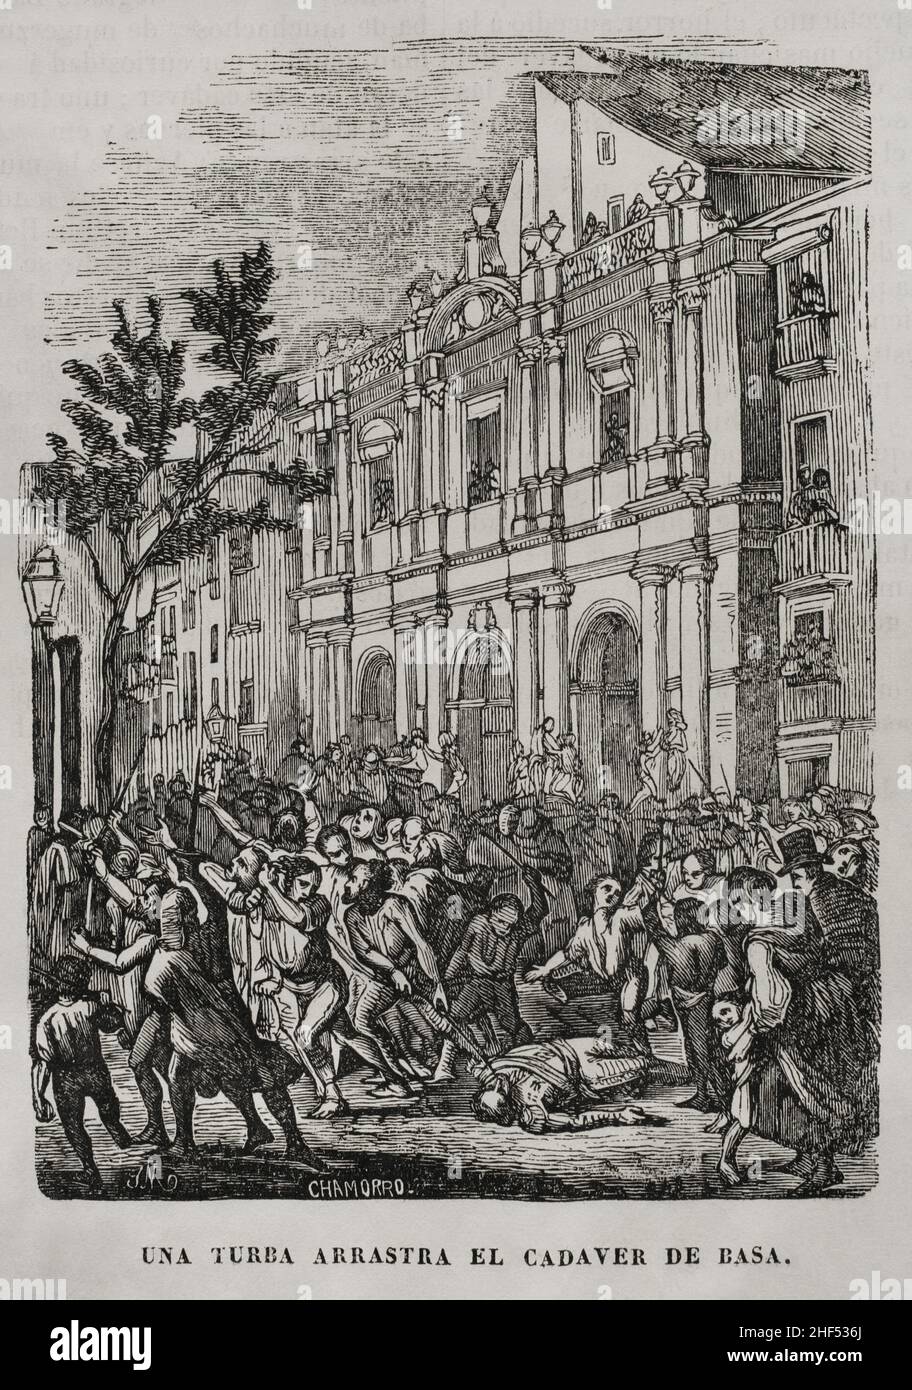 History of Spain. Catalonia, Barcelona. First Carlist War (1833-1840). Anti-clerical riots of 1835. Revolts against the religious orders that took place as a result of their support for the Carlist side. After the 'Bullanga of Barcelona' on 25 July 1835, the Captain General of Catalonia, General Llauder, sent military forces to the city under the command of Field Marshal Bassa. On 5 August, he went to the Captaincy building where he was rebuked by the crowd demanding his resignation. When he refused, the crowd invaded the building, shot him dead and threw his body off the balcony, after which Stock Photo